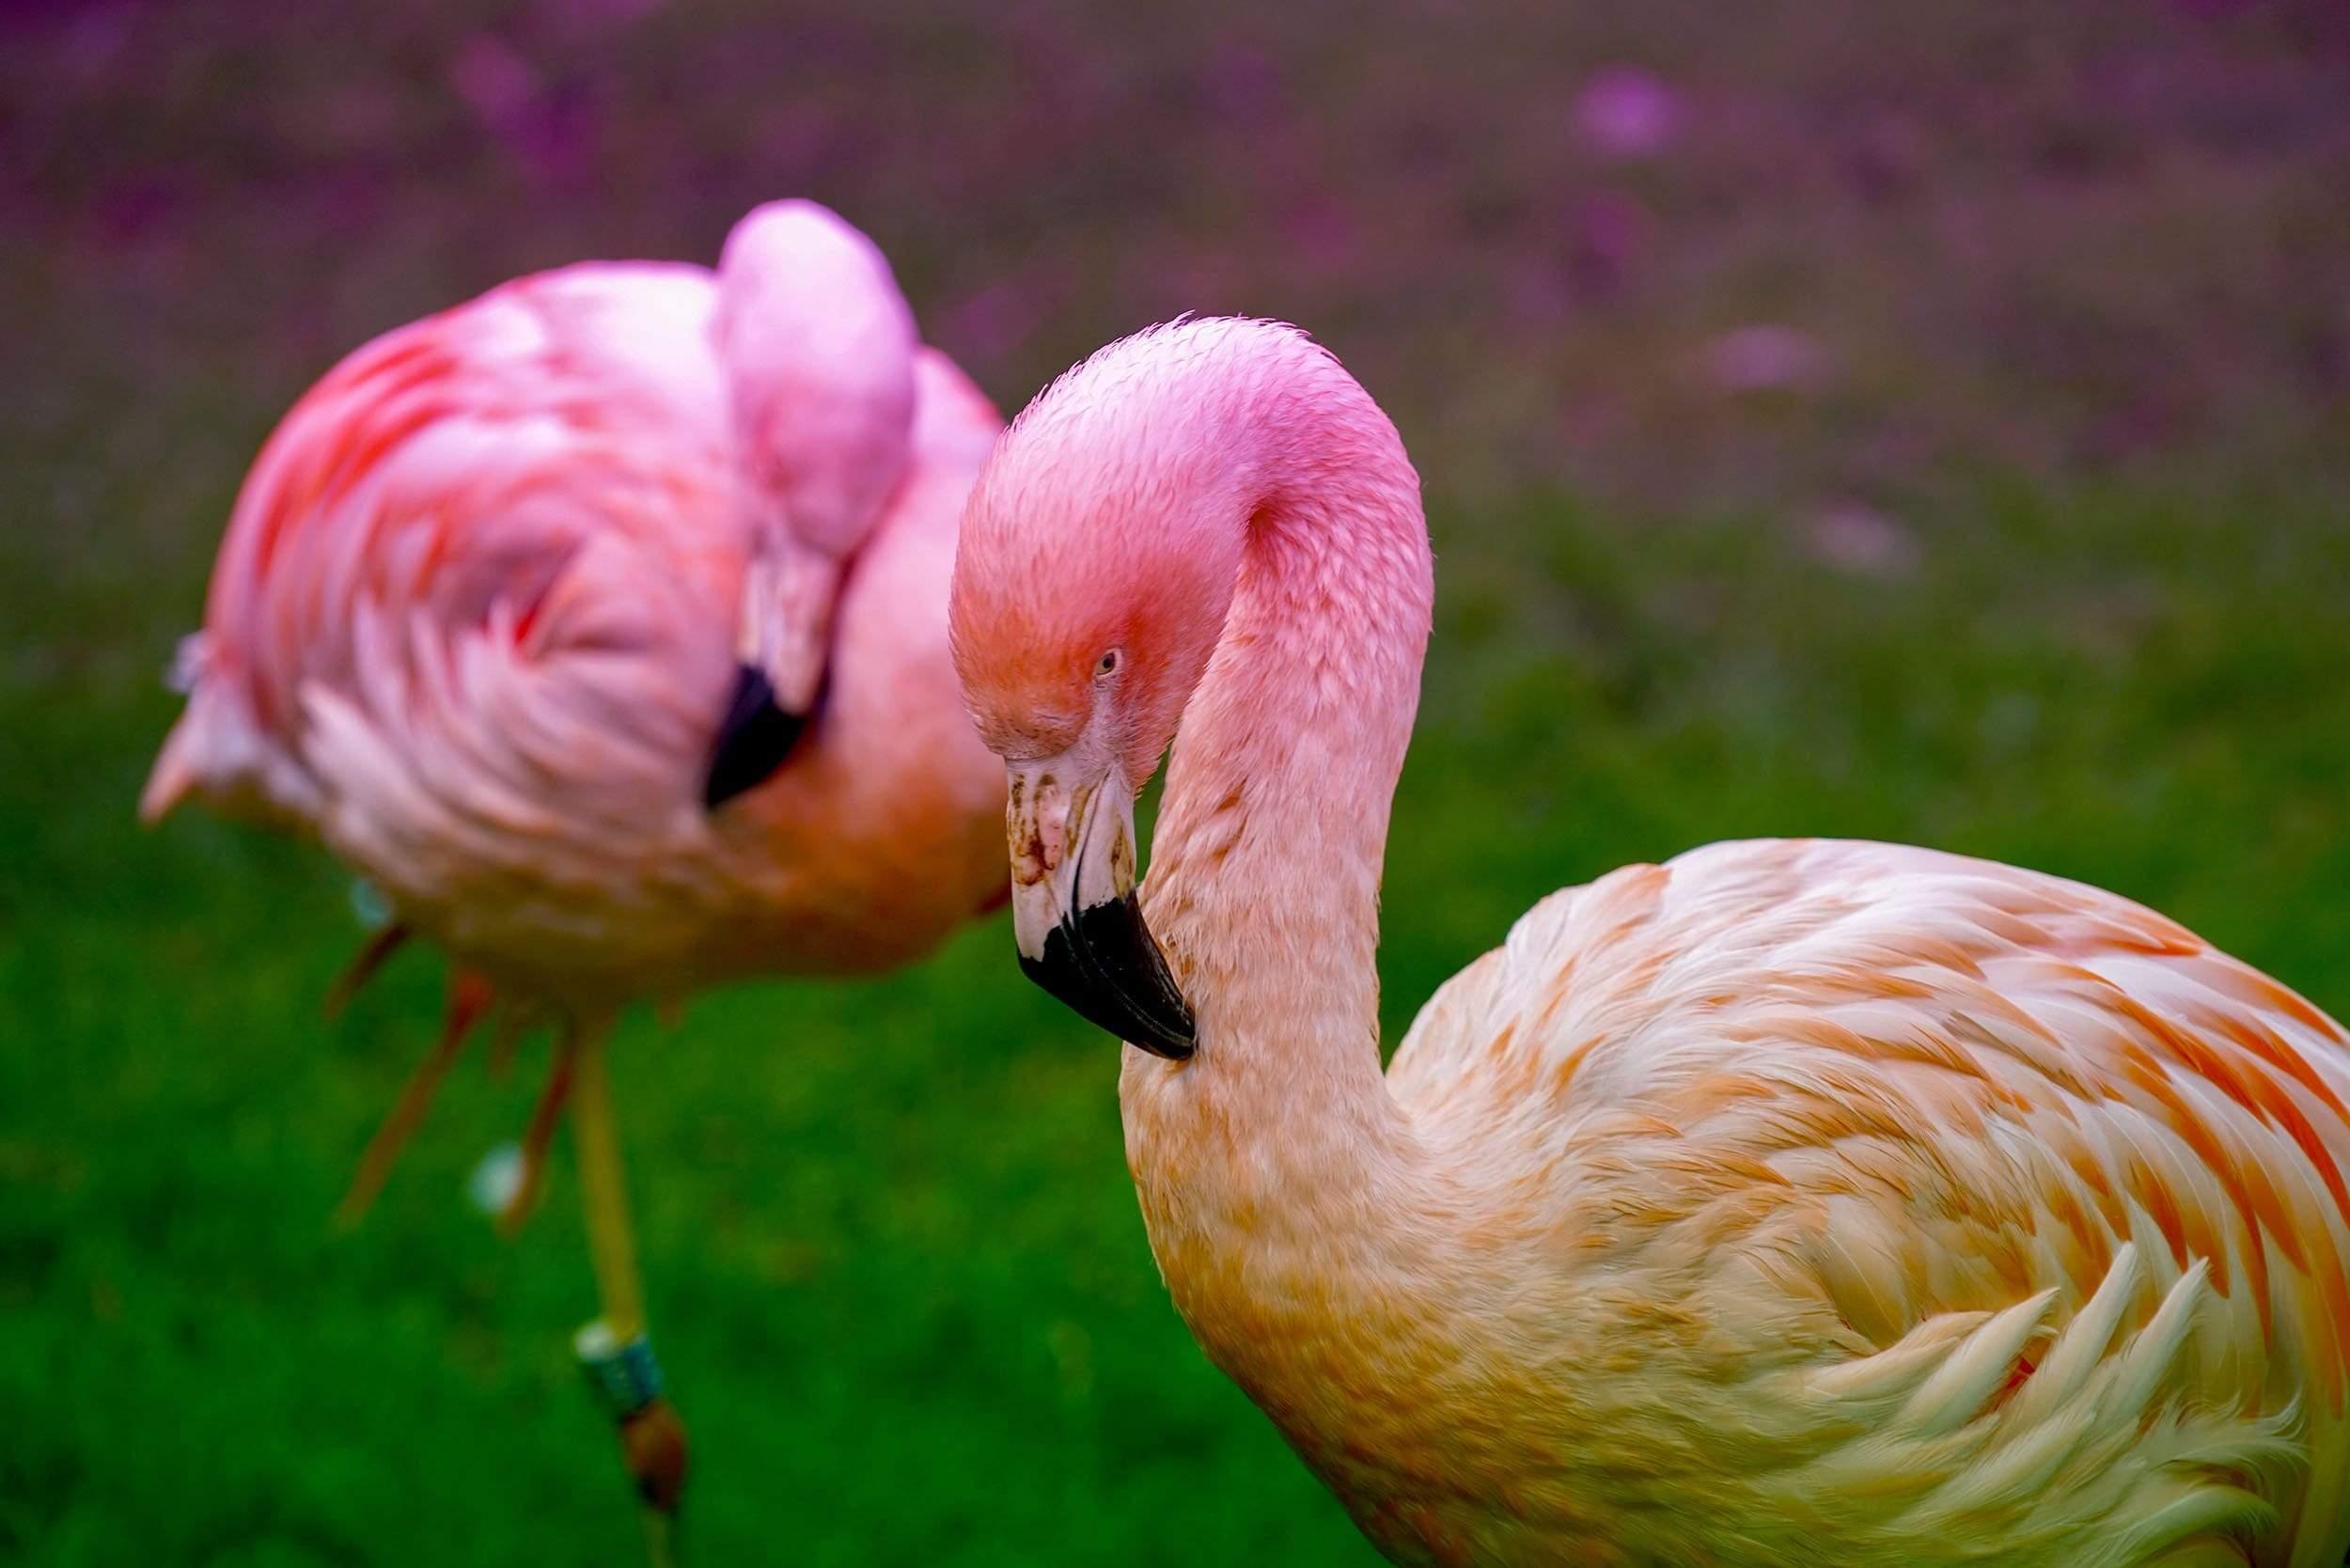 Pink Swans on Green Grass